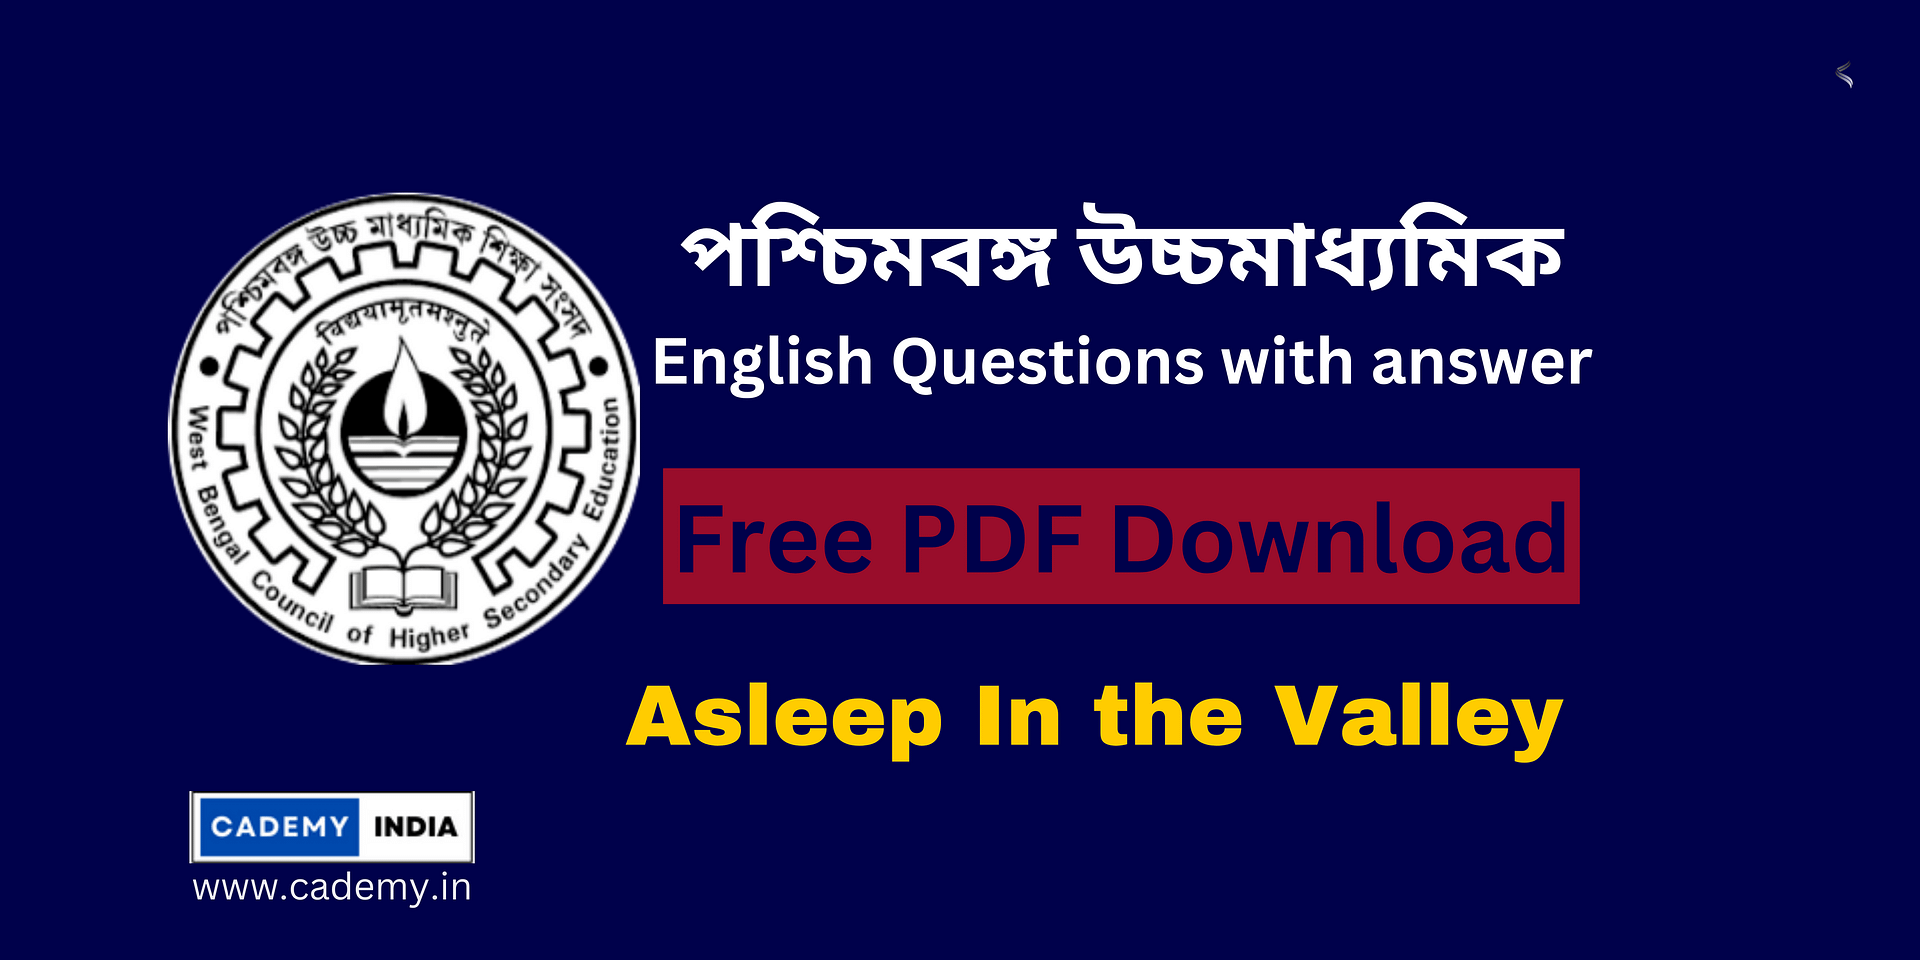 Asleep In the Valley Questions with answer free pdf download | WB Class 12 Asleep In the Valley Suggestions